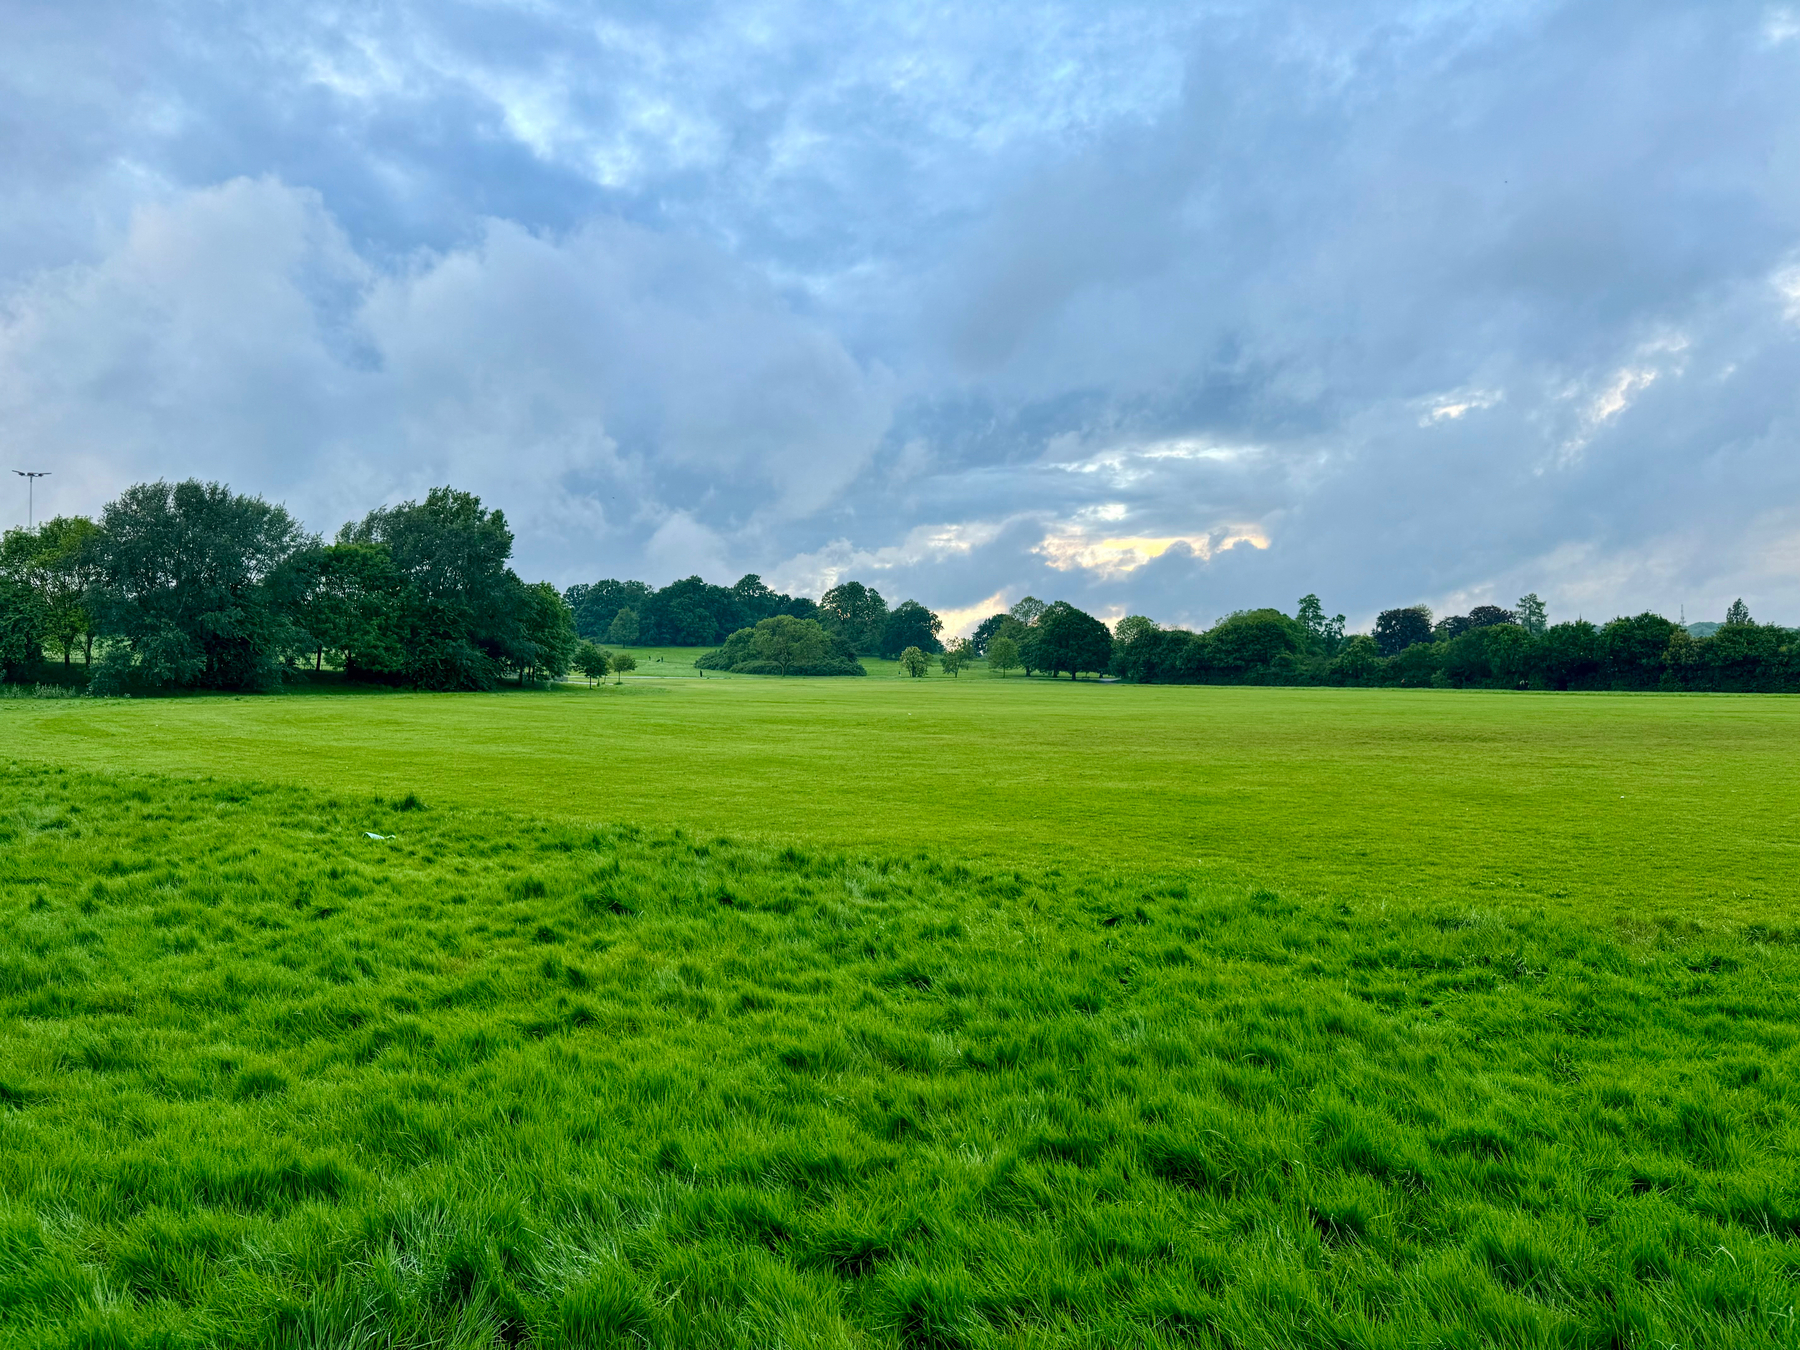 A lush green field with trees on the periphery under a cloudy sky.